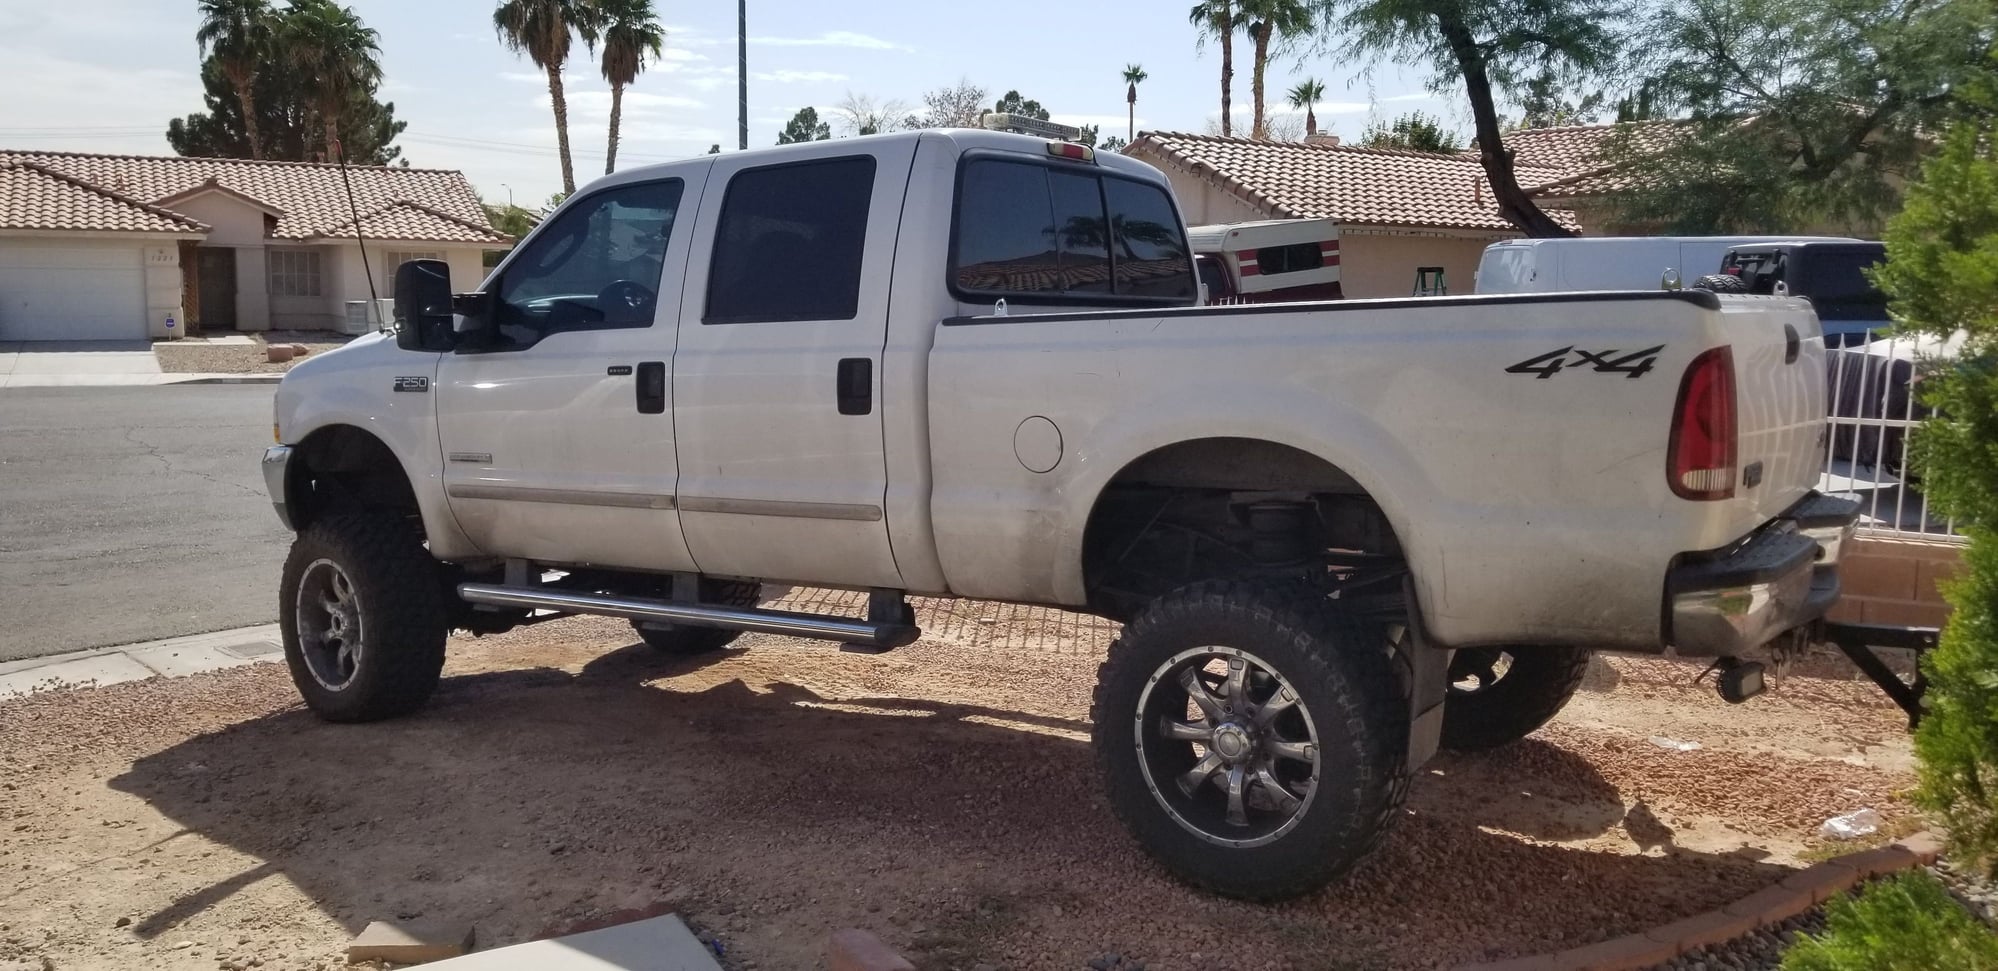 2004 Ford F-250 Super Duty - Ford F250 6.0l Diesel 4x4 - Used - VIN 1FTNW21P24ED53568 - 236,000 Miles - 8 cyl - 4WD - Automatic - Truck - White - North Las Vegas, NV 89031, United States